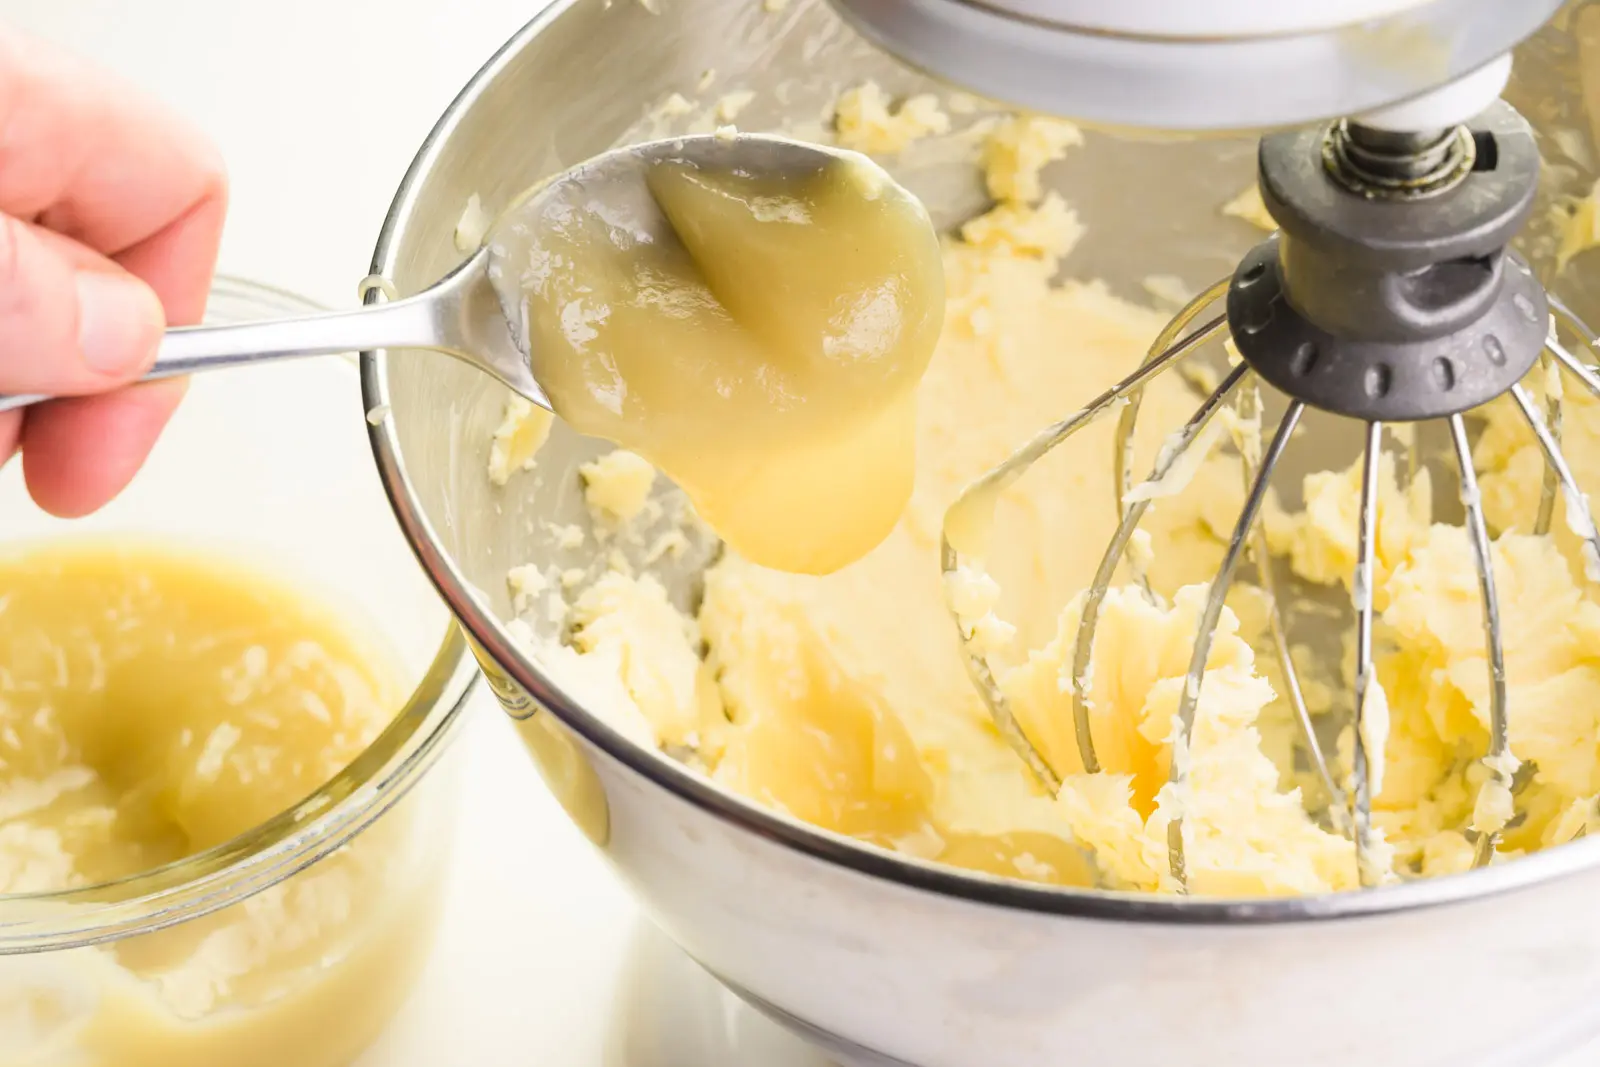 A hand holds a spoon dripping a creamy mixture in with whipped butter. A bowl of the creamy mixture sits beside the mixing bowl.